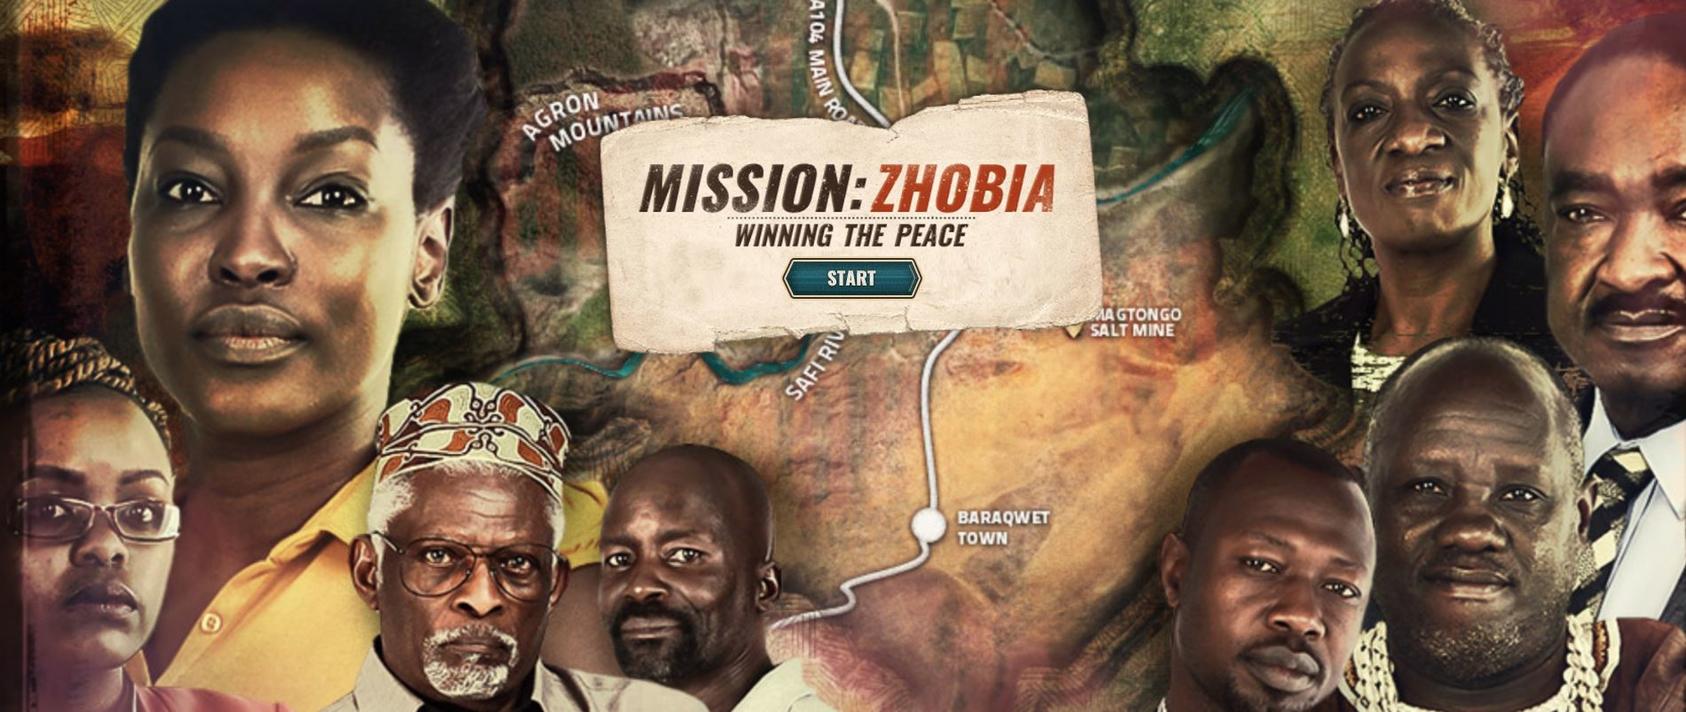 Welcome to Mission Zhobia